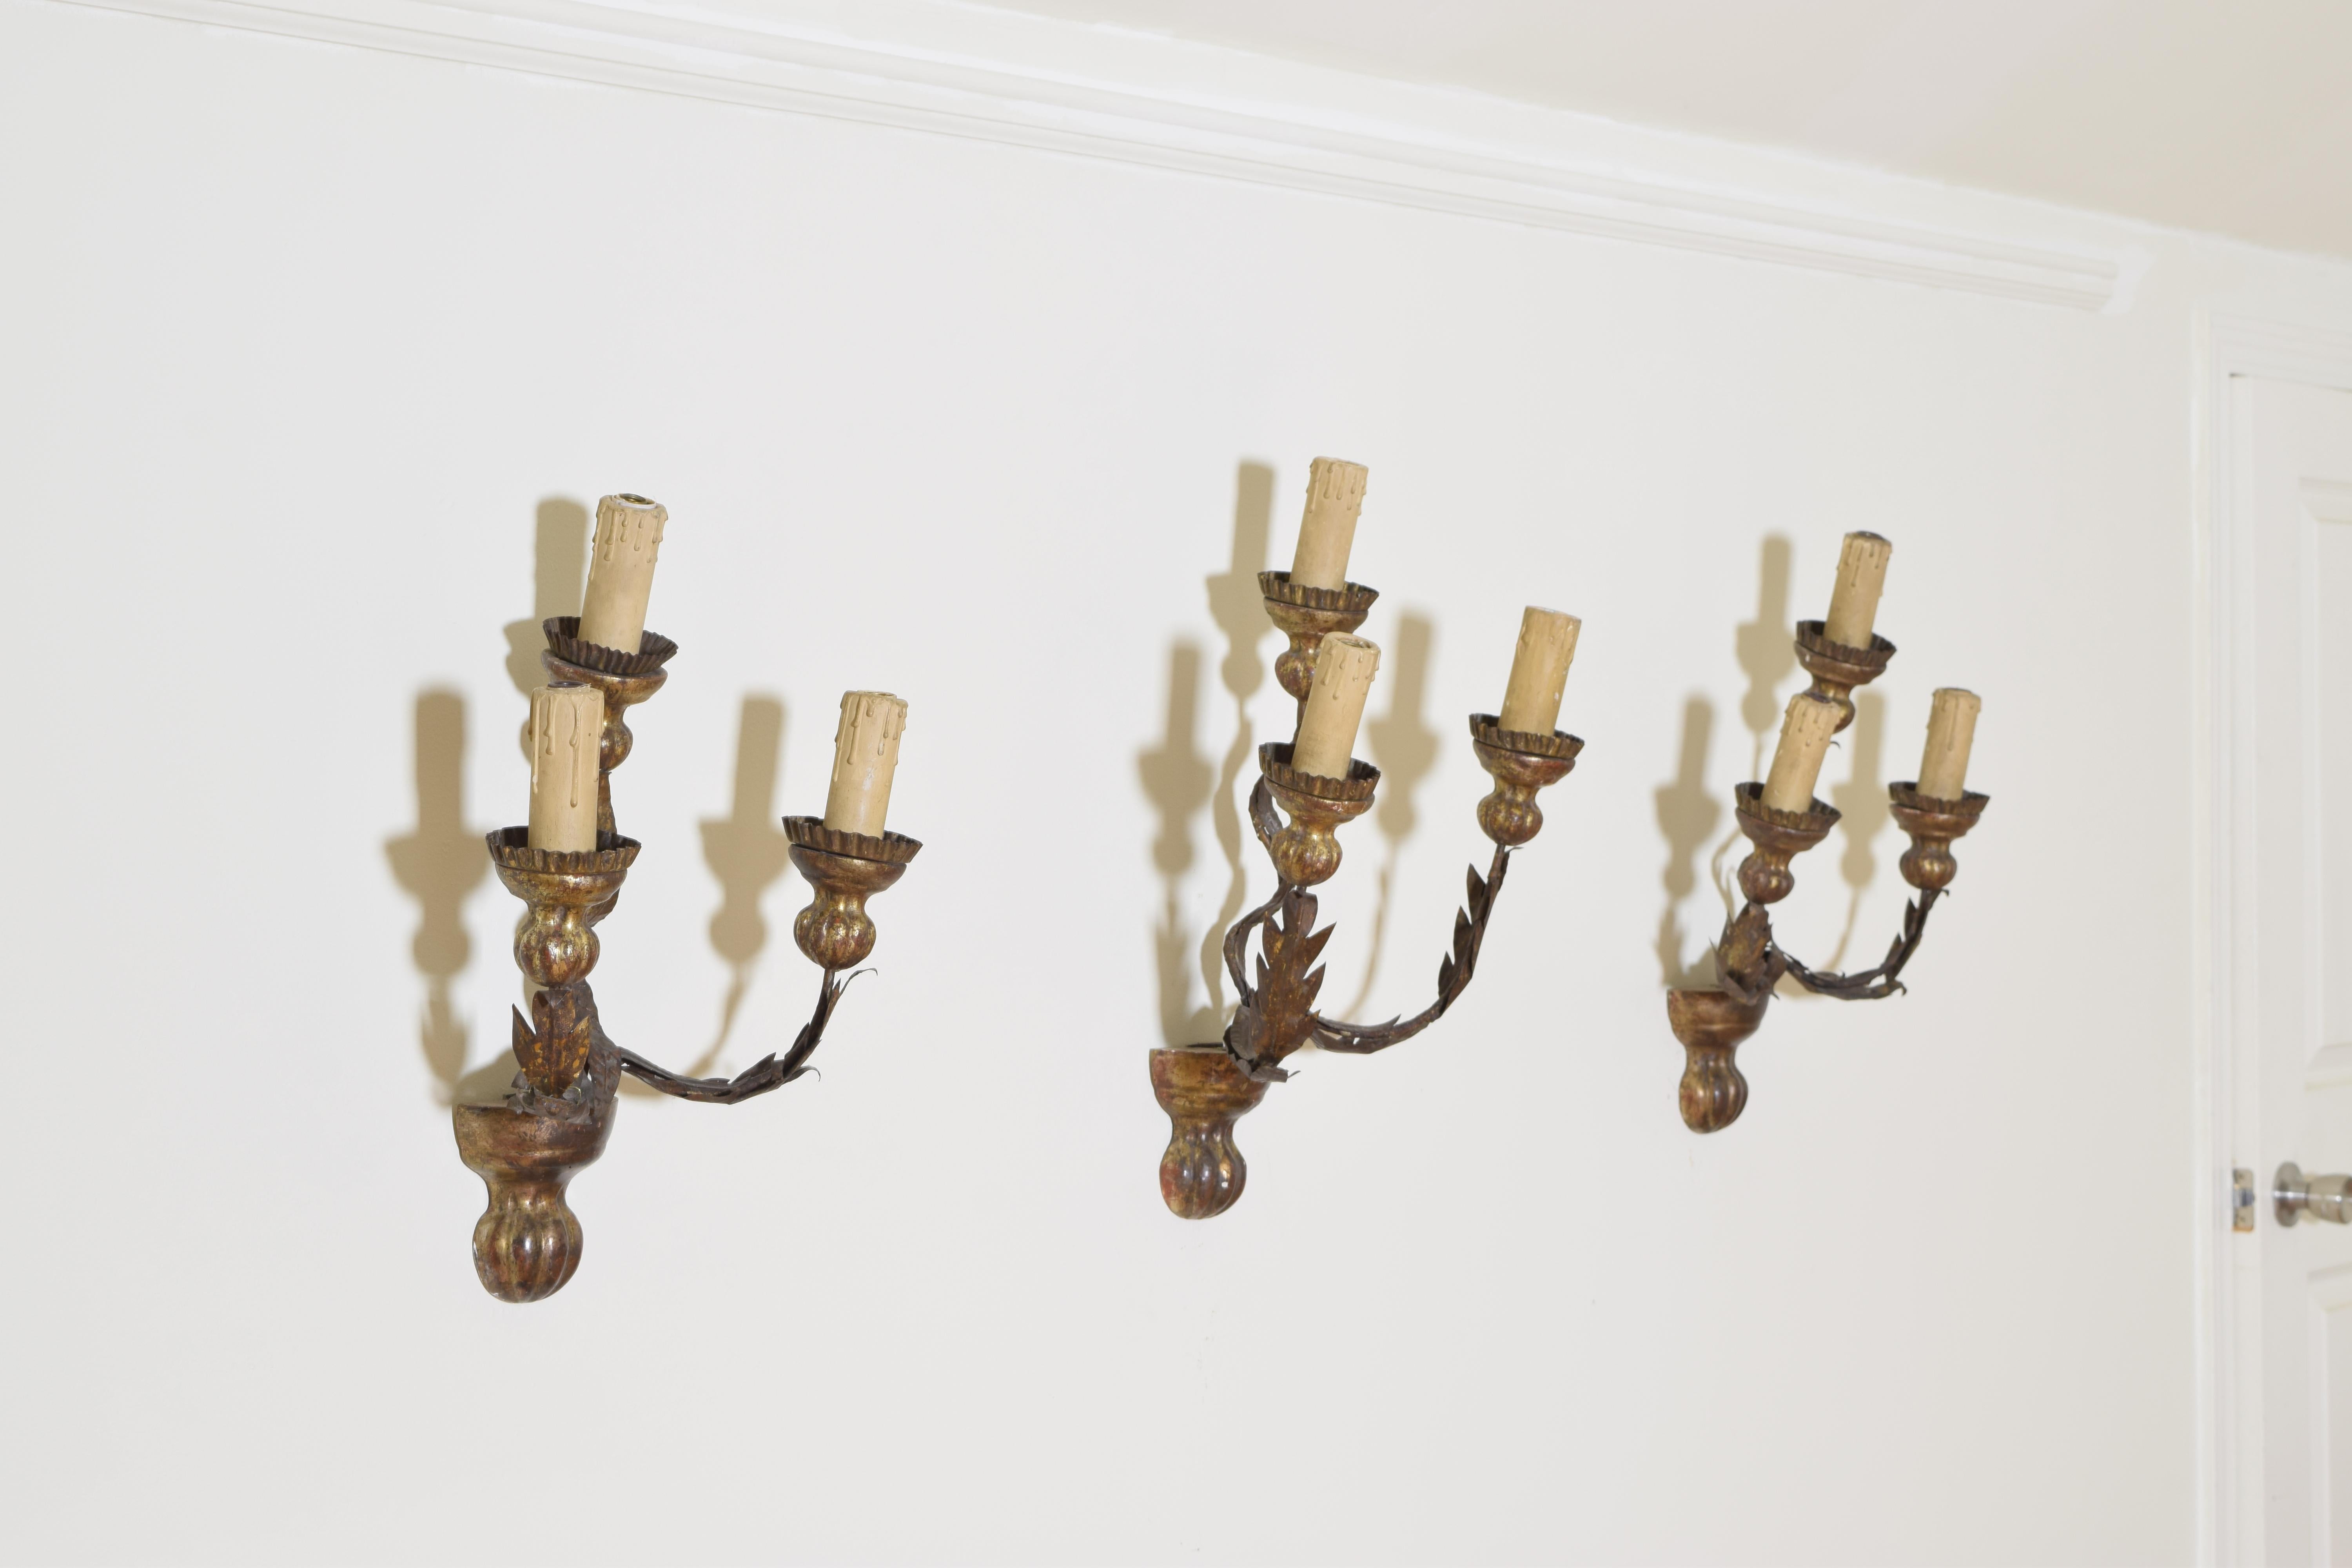 Neoclassical Group of 4 Italian Giltwood, Iron, and Metal 3-Arm Wall Sconces